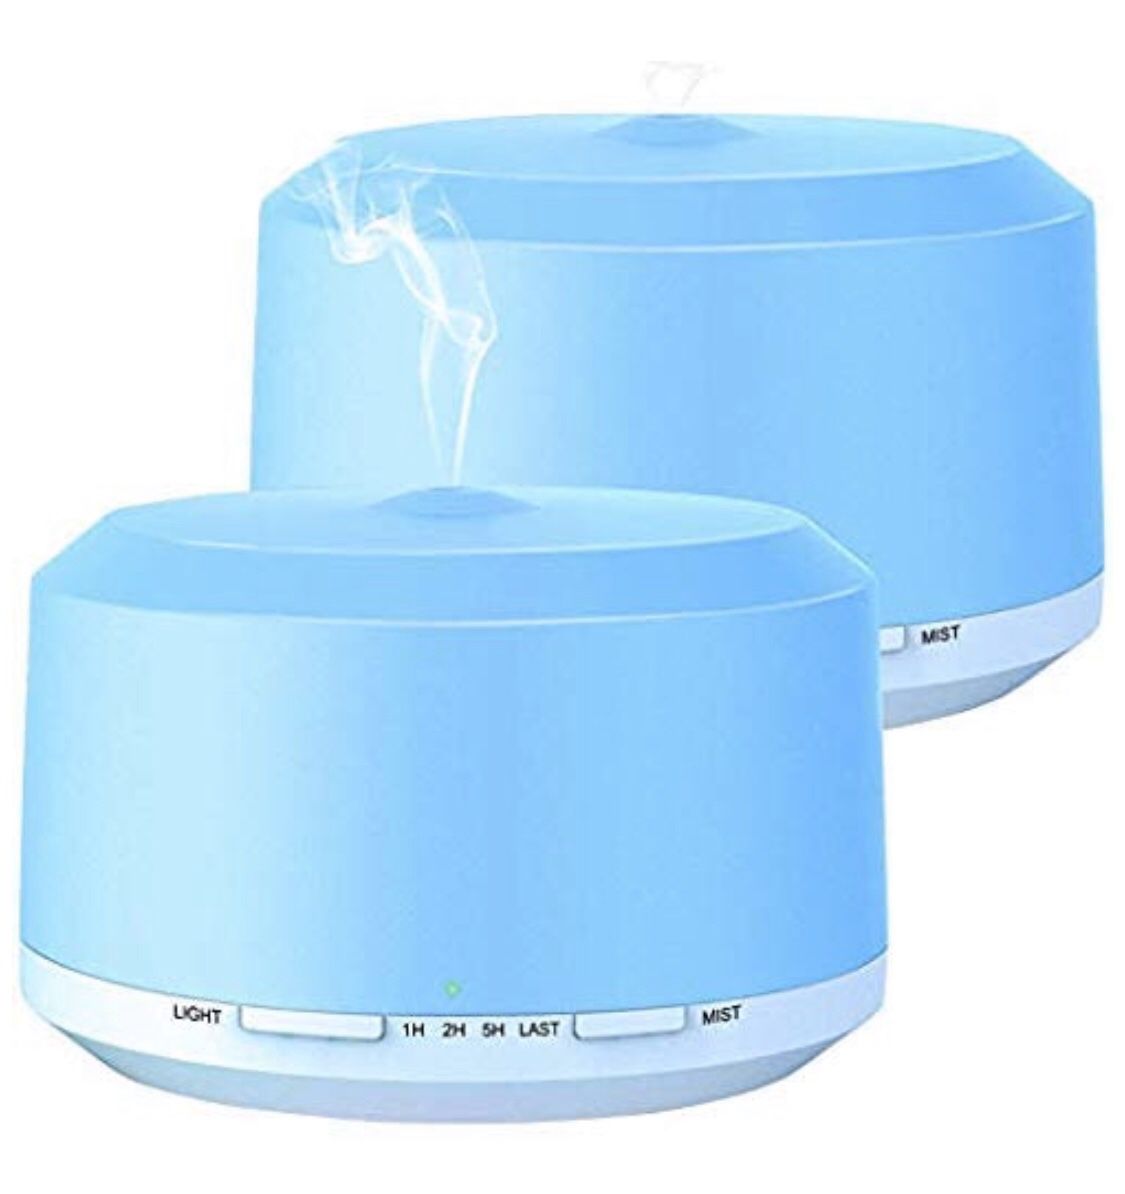 2 pack Humidifier, white, auto-shut off, 450ml, prefect for bedroom bed or office desk